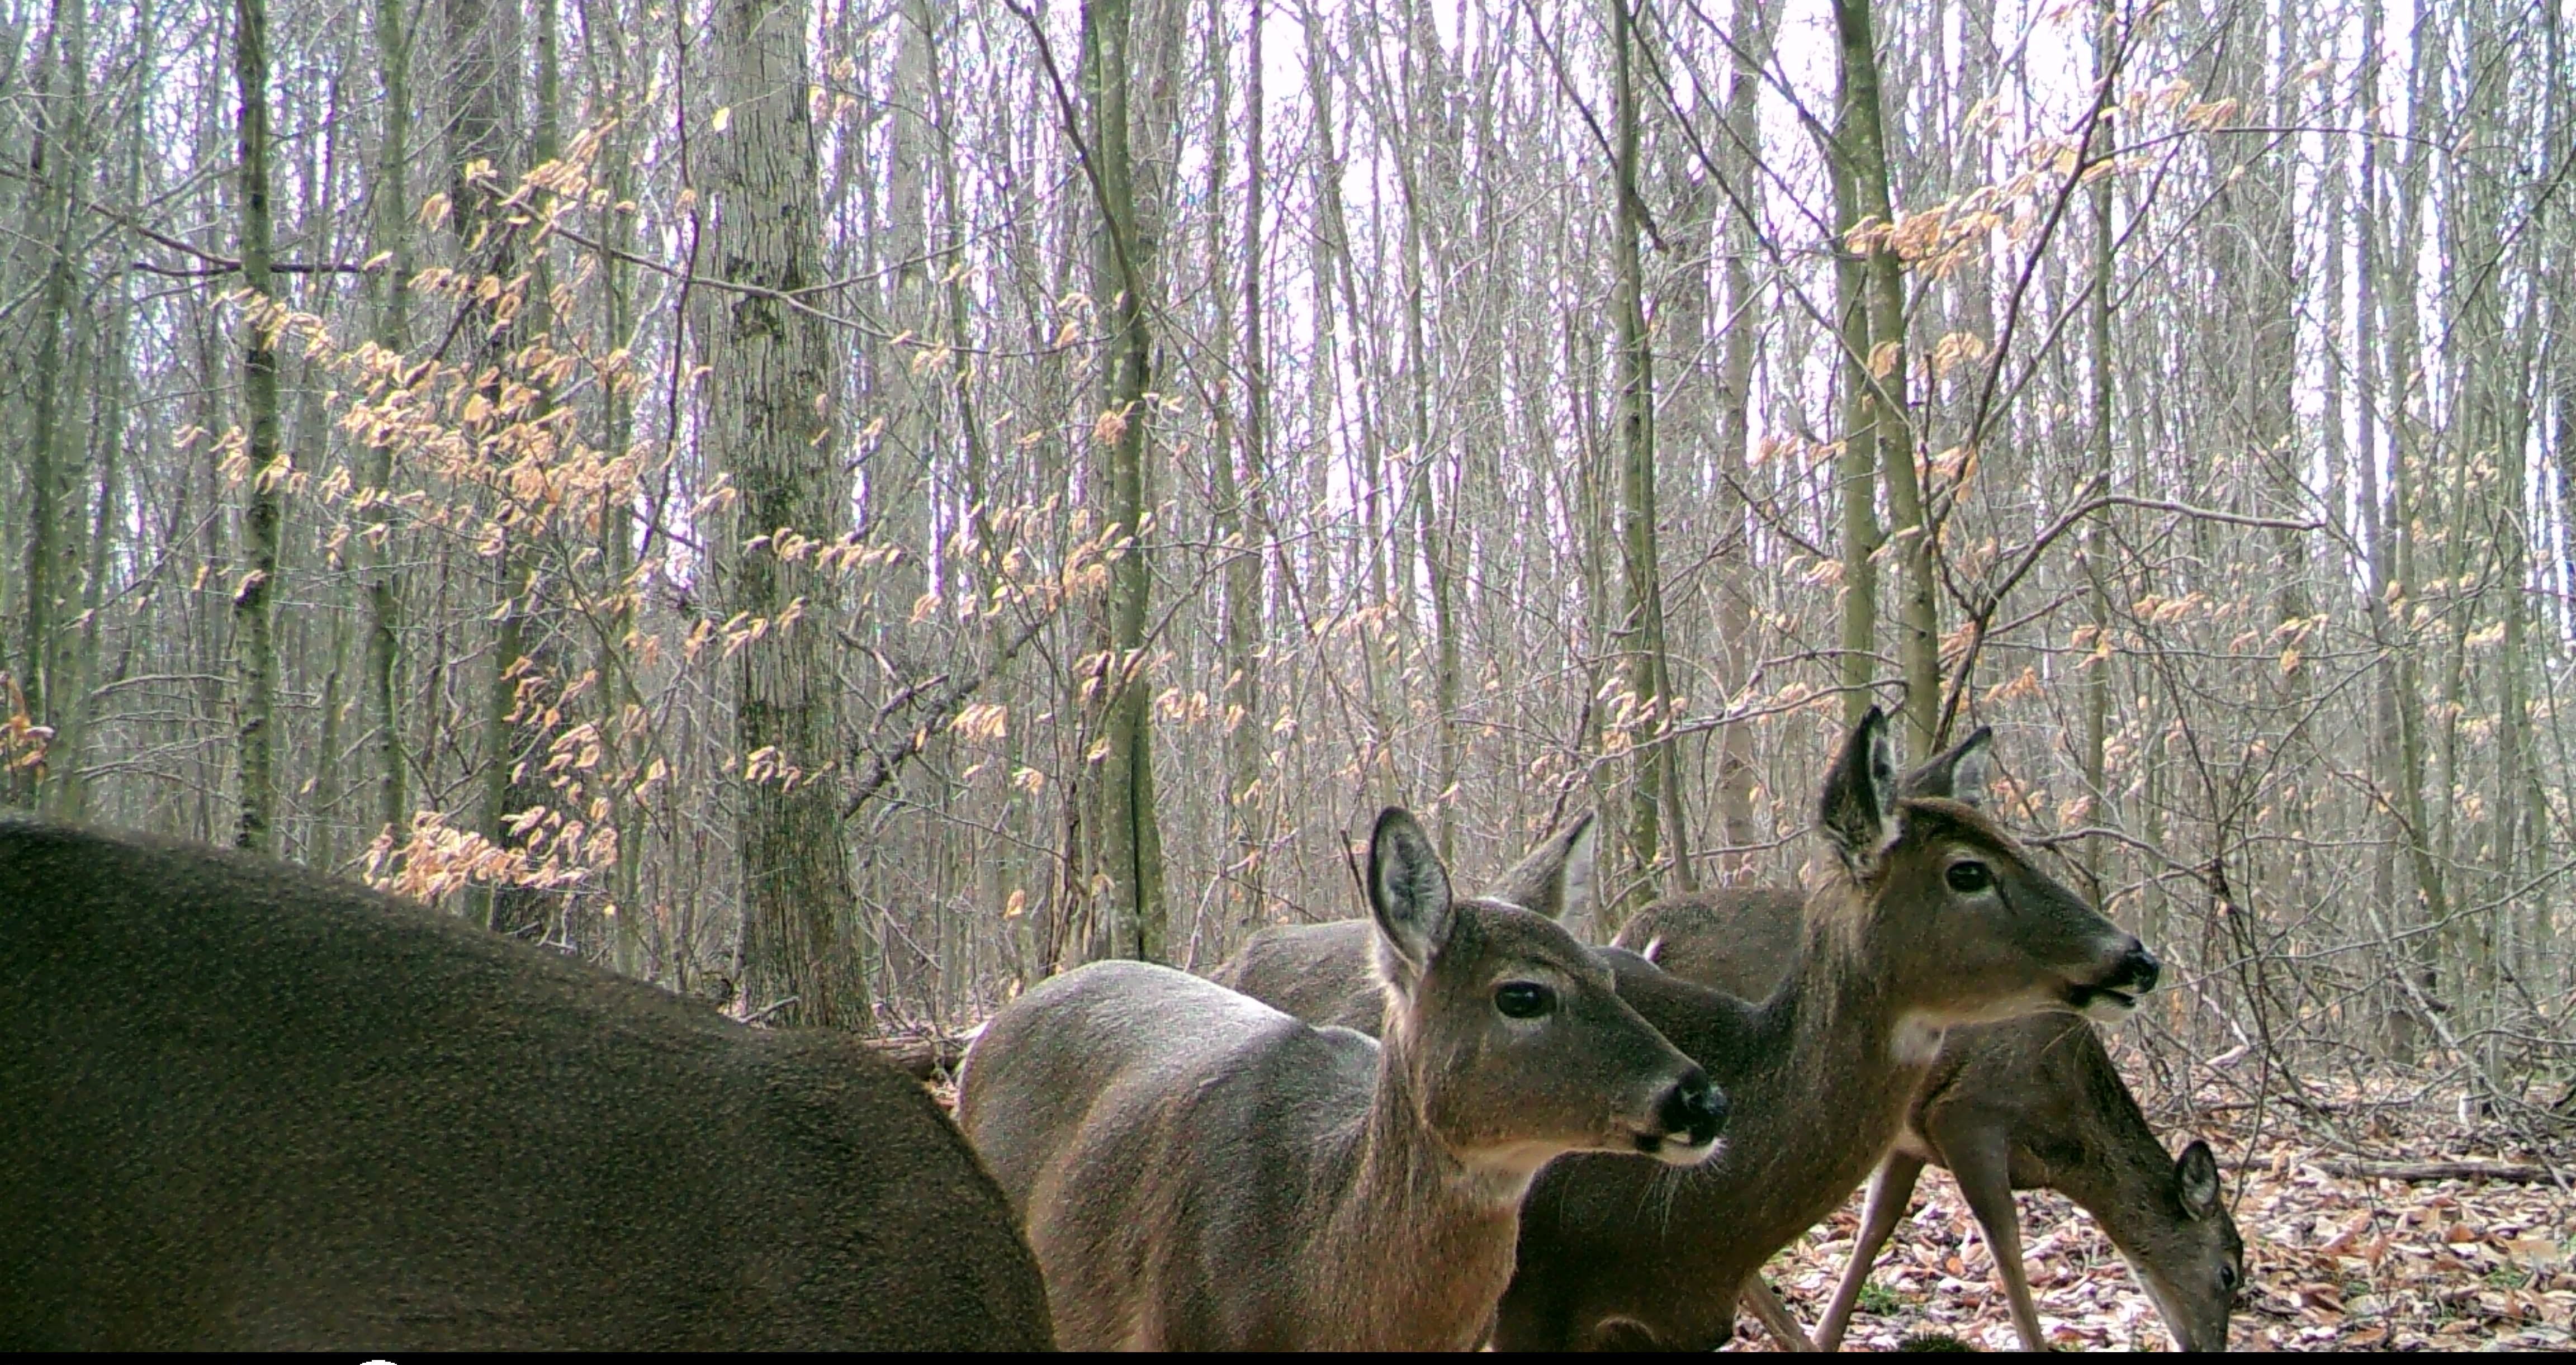 Group of 4 deer standing close to camera in the woods